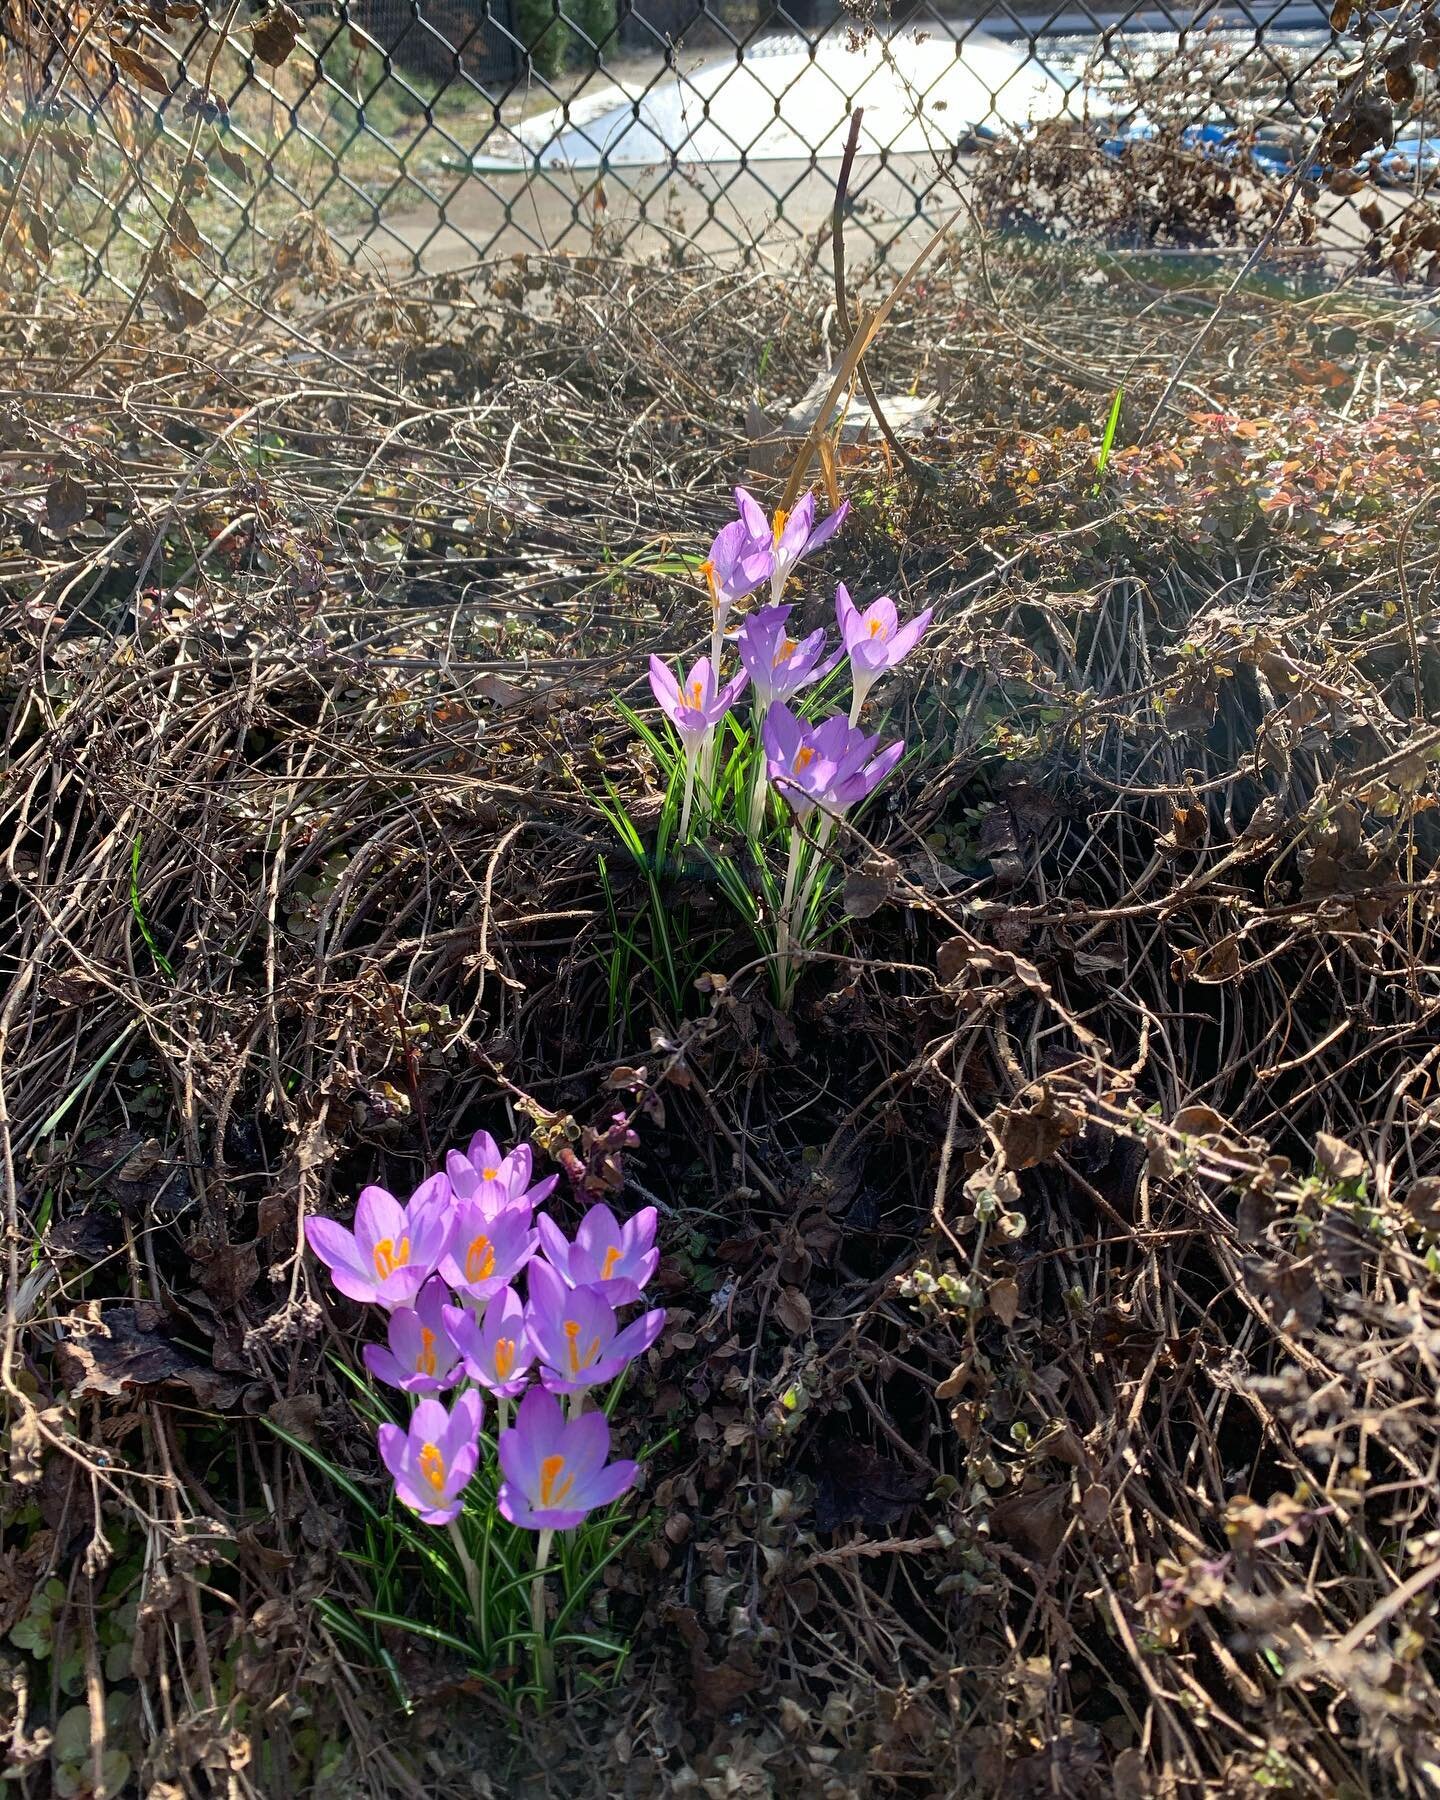 Look who has popped up in my garden! A reminder of the power of growth and renewal. #pathwaystopeaceyogaandhealing #beautiful #signsofspring #crocus #growth #renewal #growthandrenewal #powerofgrowth #powerofrenewal